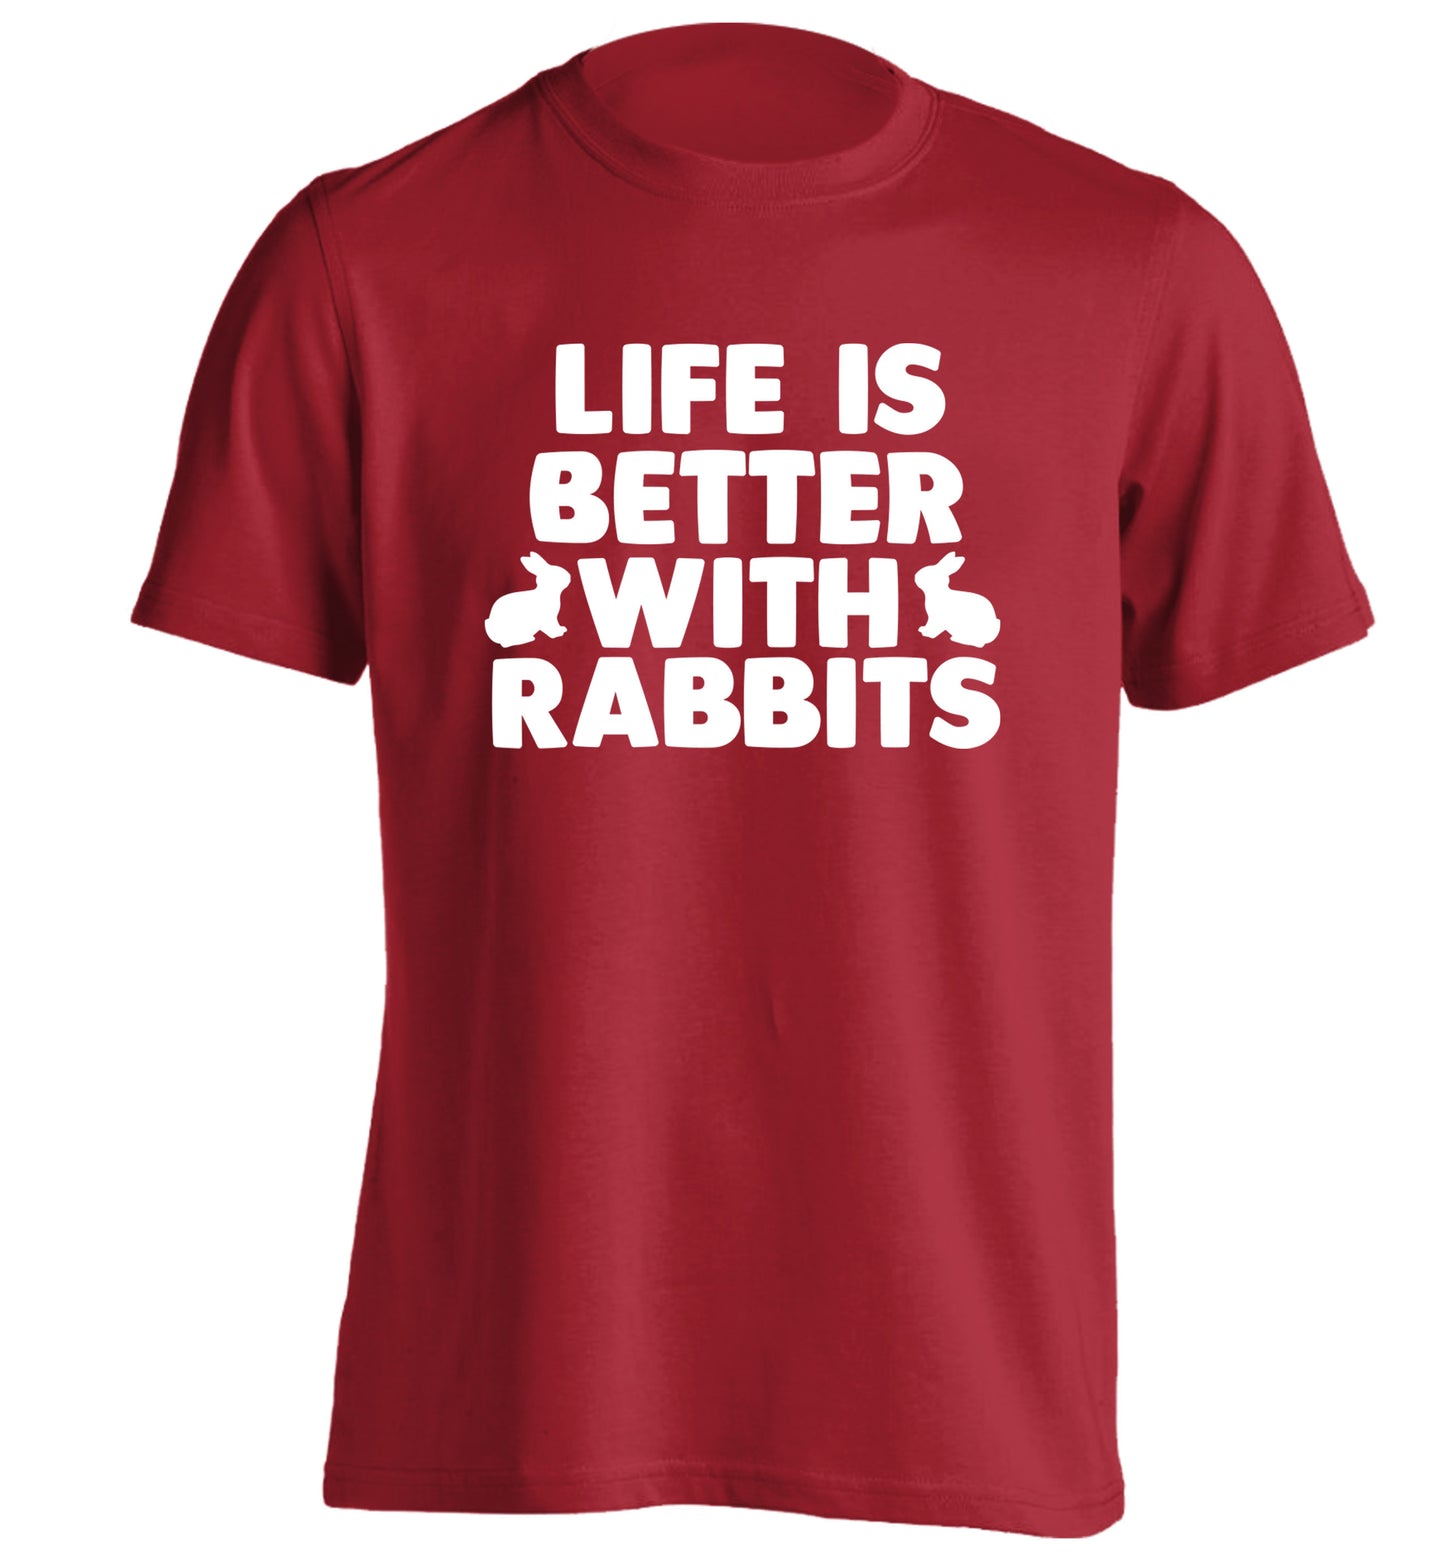 Life is better with rabbits adults unisex red Tshirt 2XL